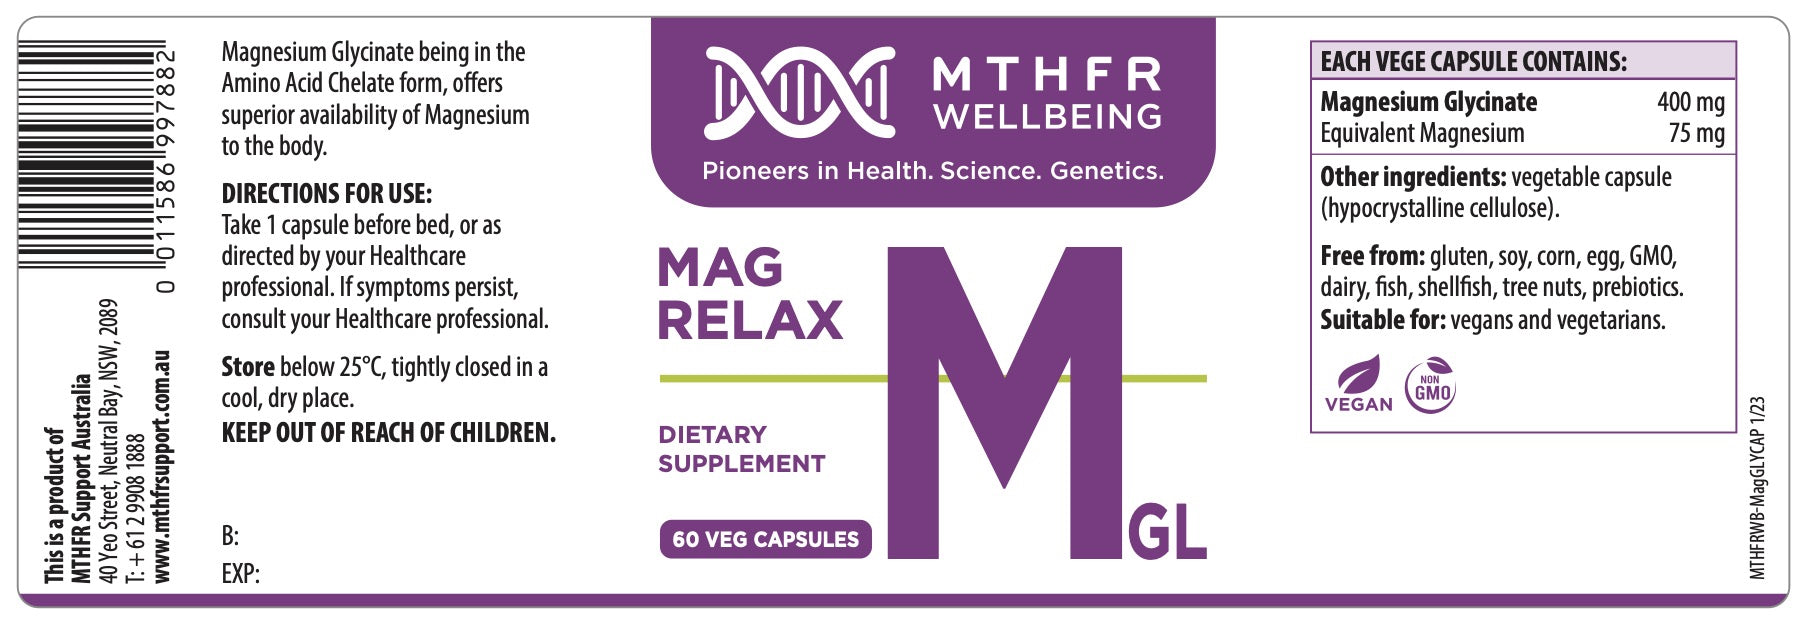 MTHFR Wellbeing Mag Relax 60c